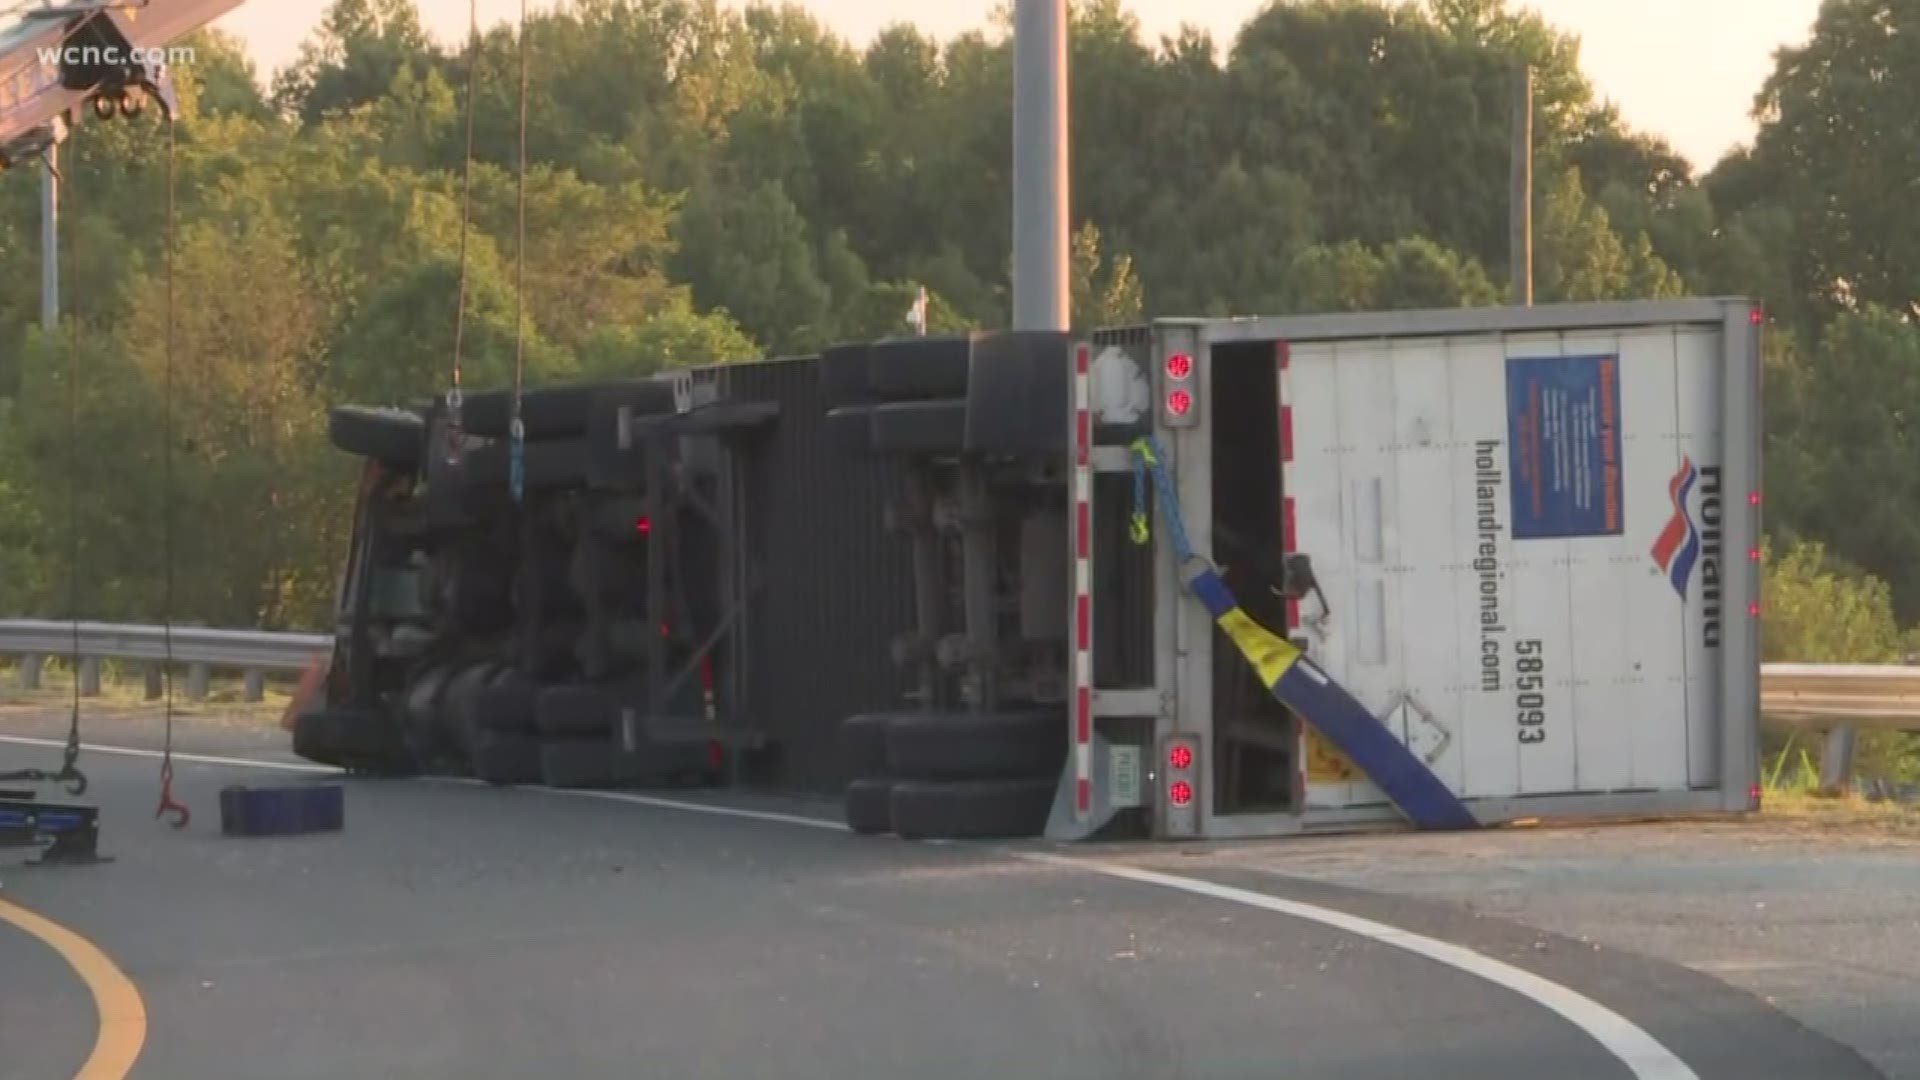 The crash happened around 5 a.m. Sunday morning. NCDOT officials said the ramp is not expected to reopen until 10 a.m.